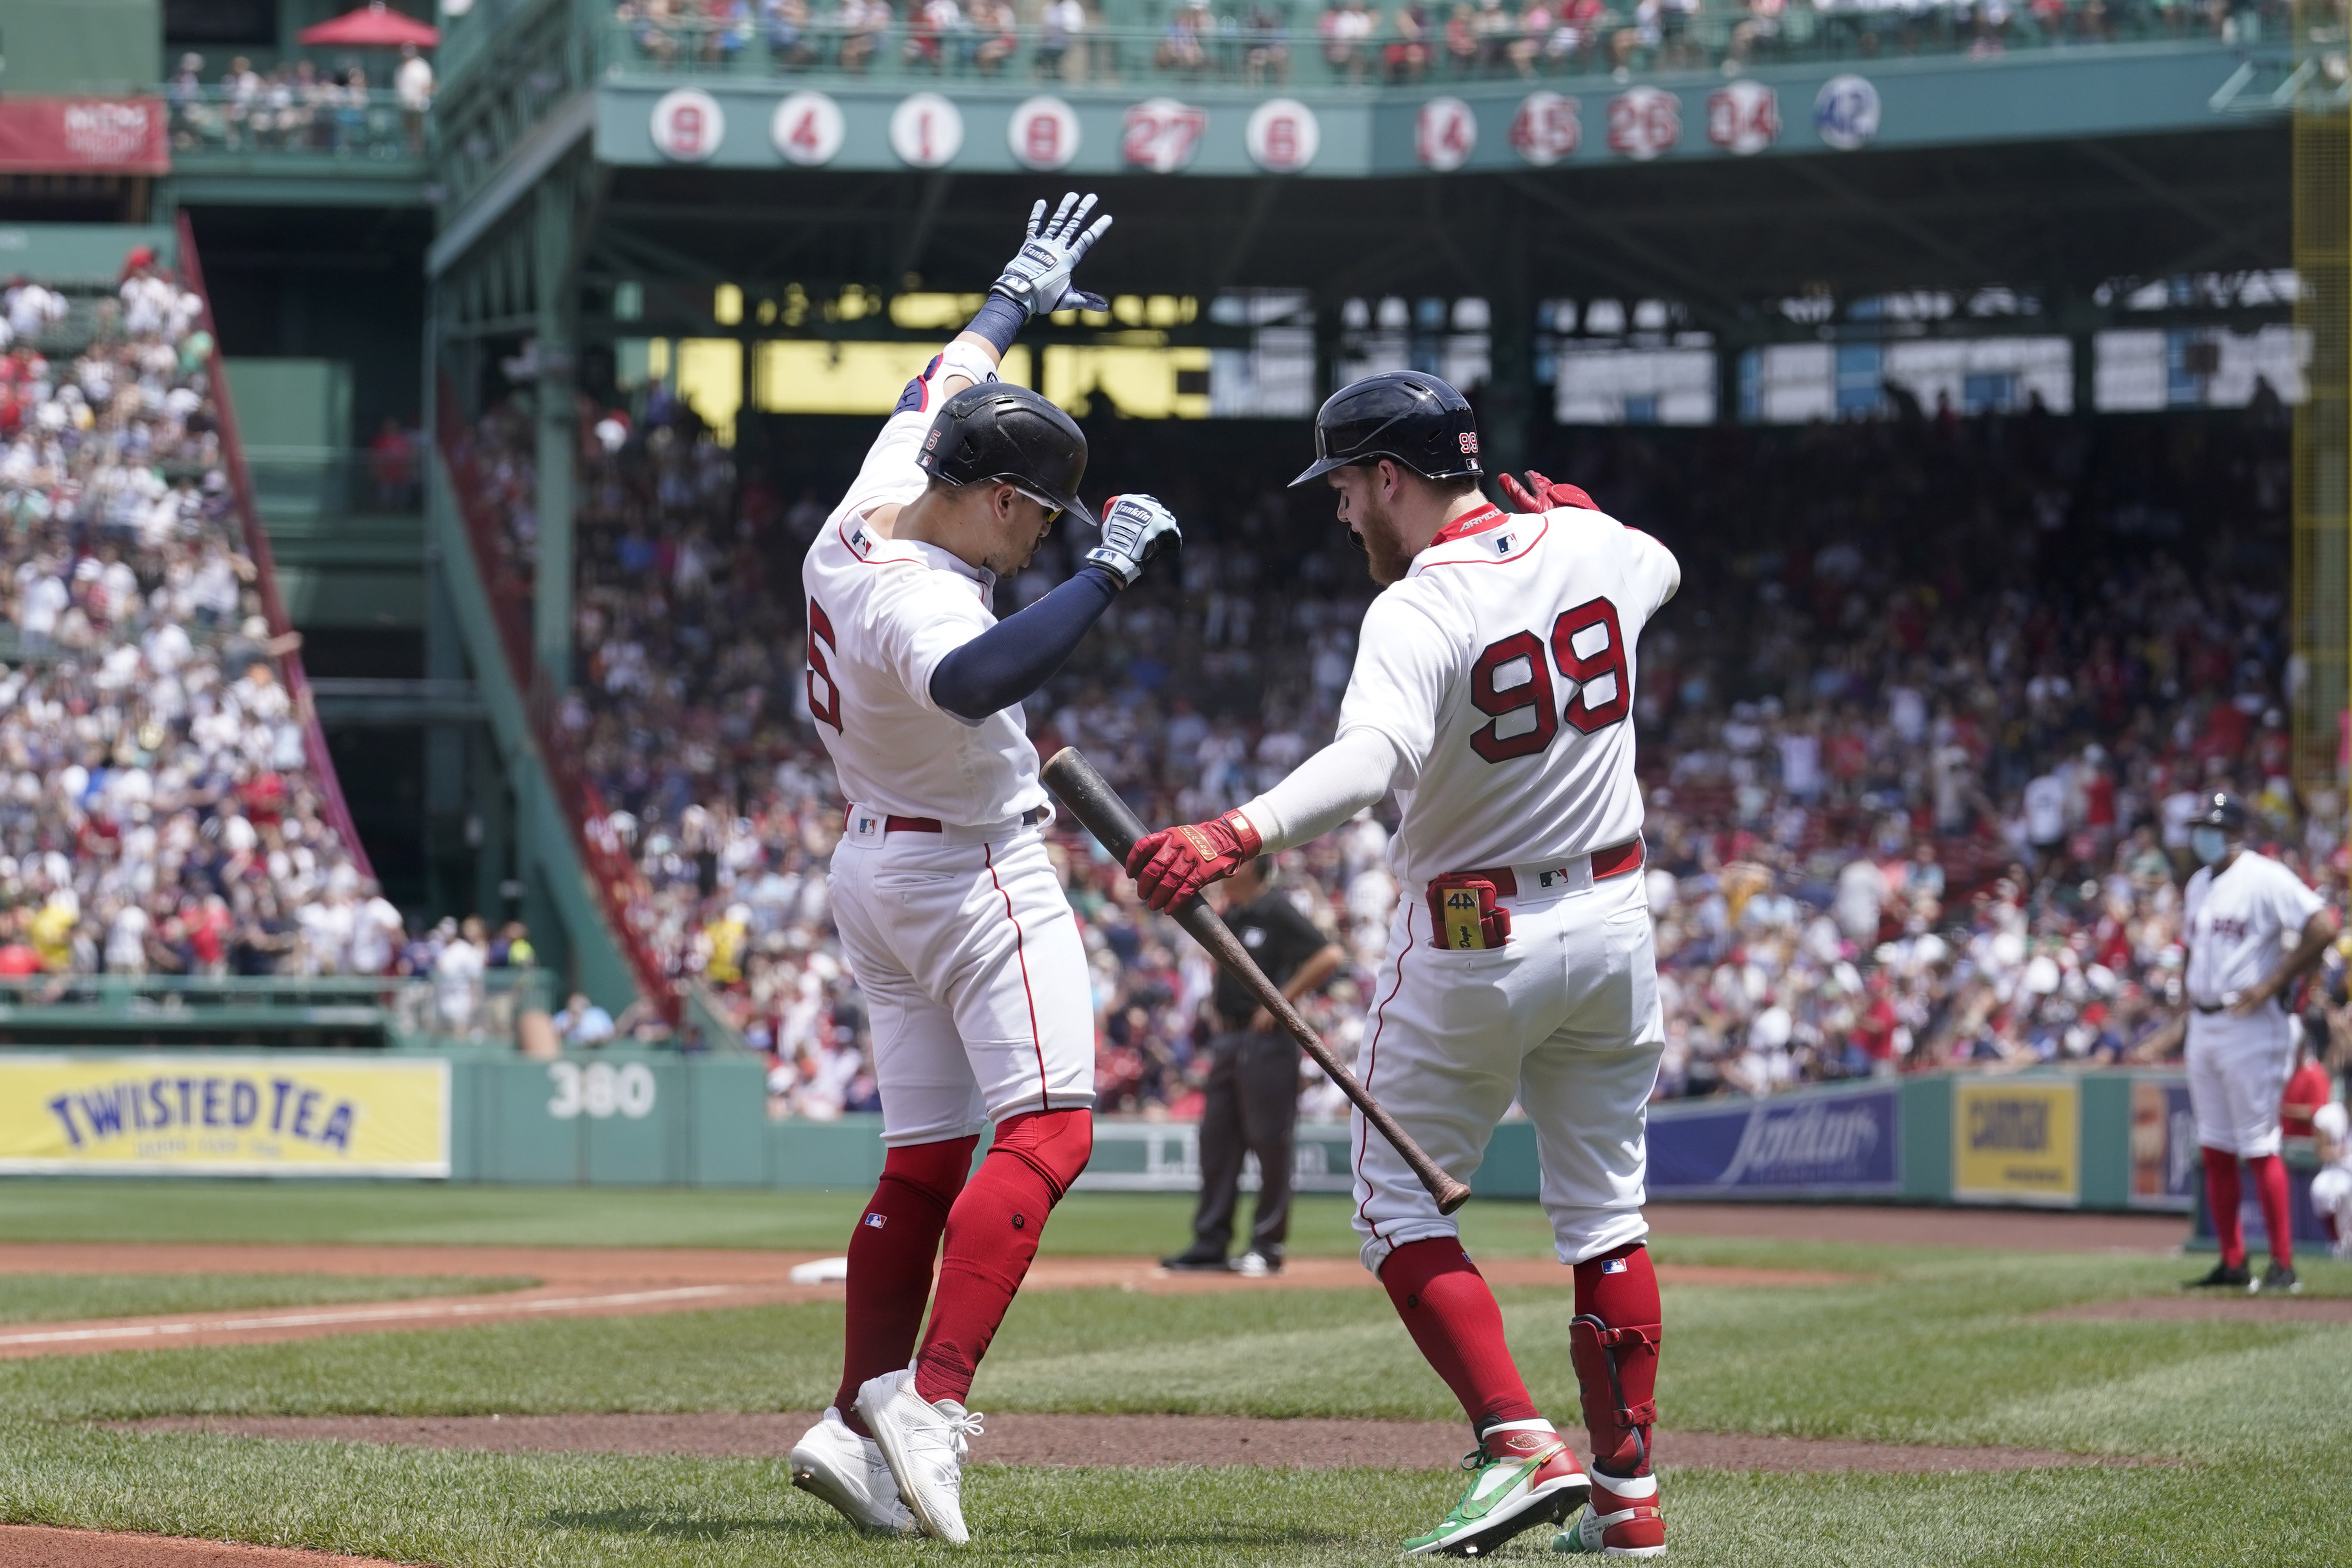 Three things to watch as the Red Sox finish their season